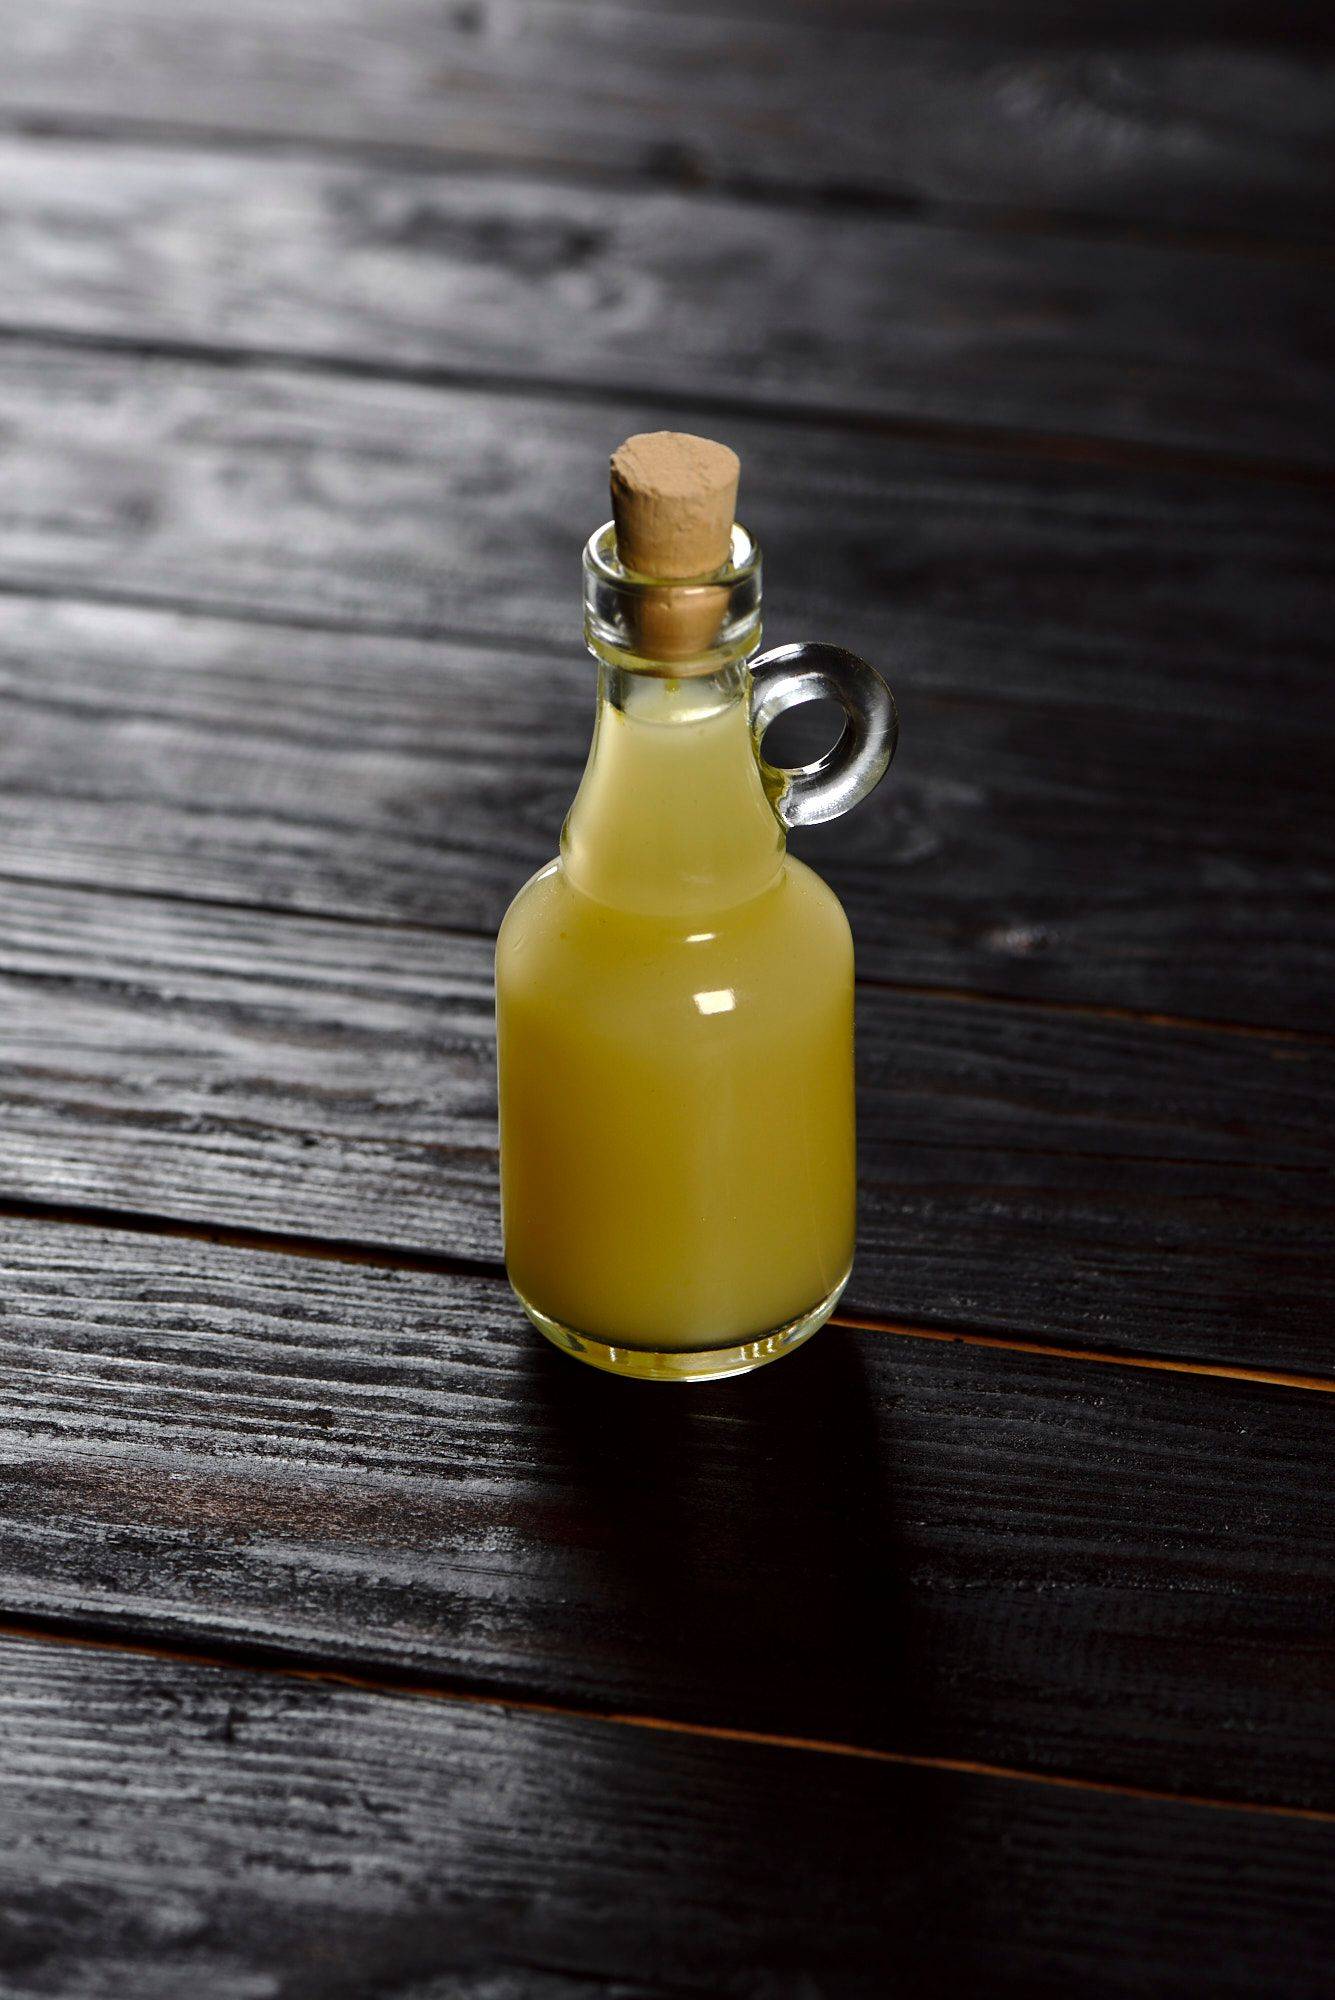 yuzu juice in a small glass bottle with black wooden background